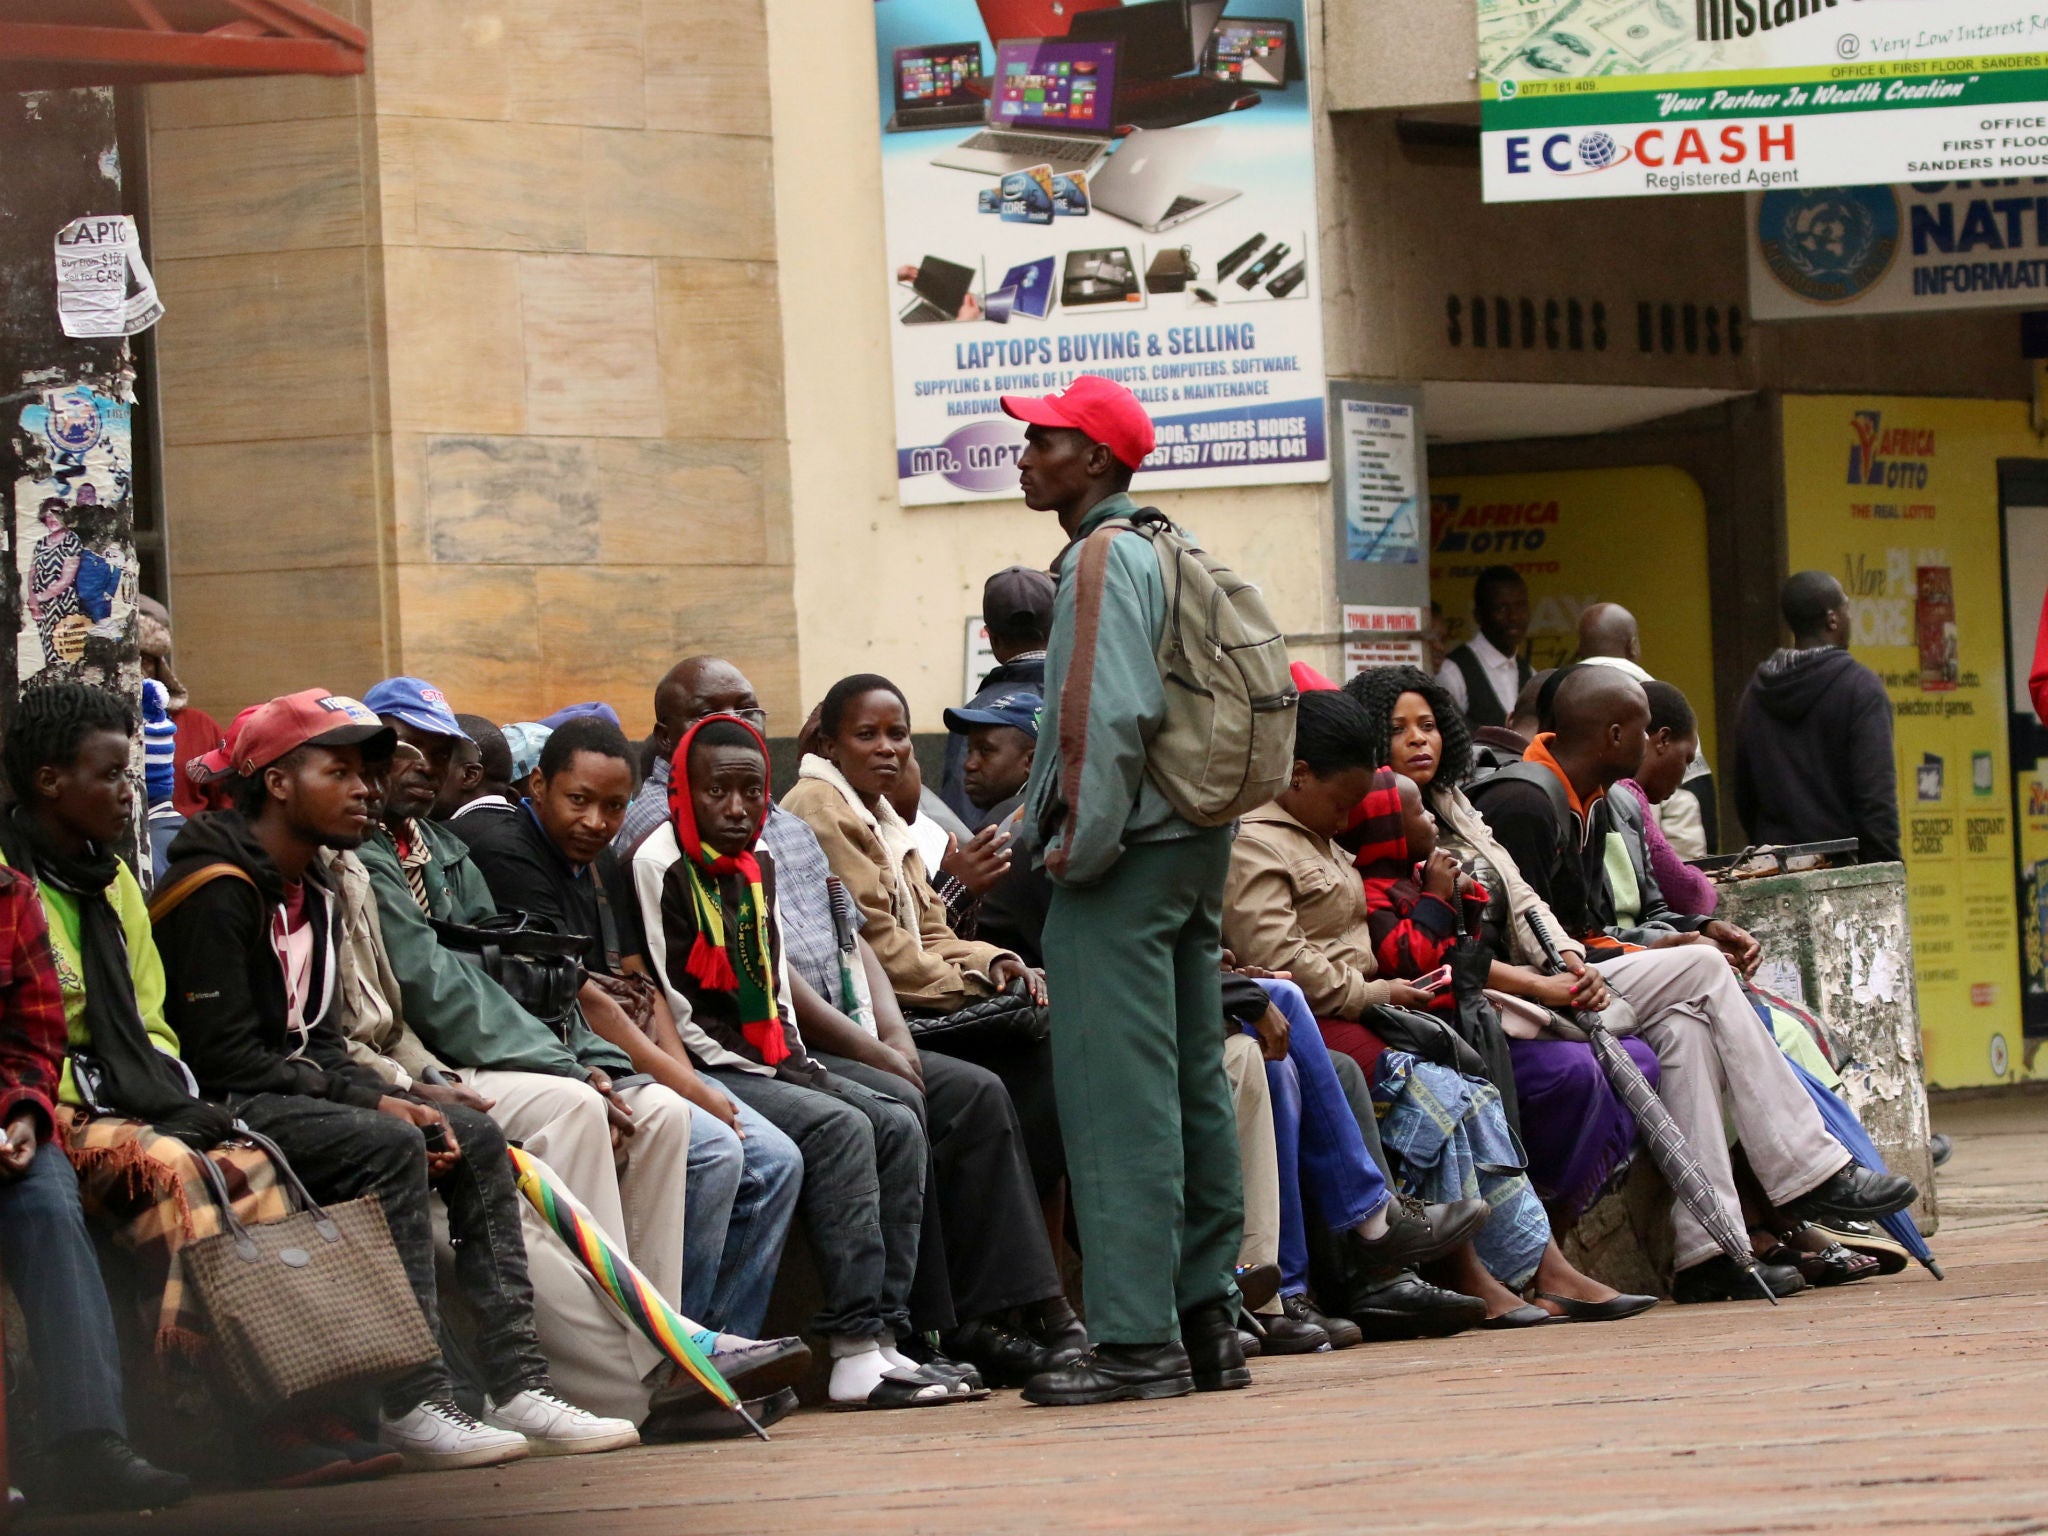 Many of Zimbabwe's young population move to South Africa and Botswana for employment opportunities